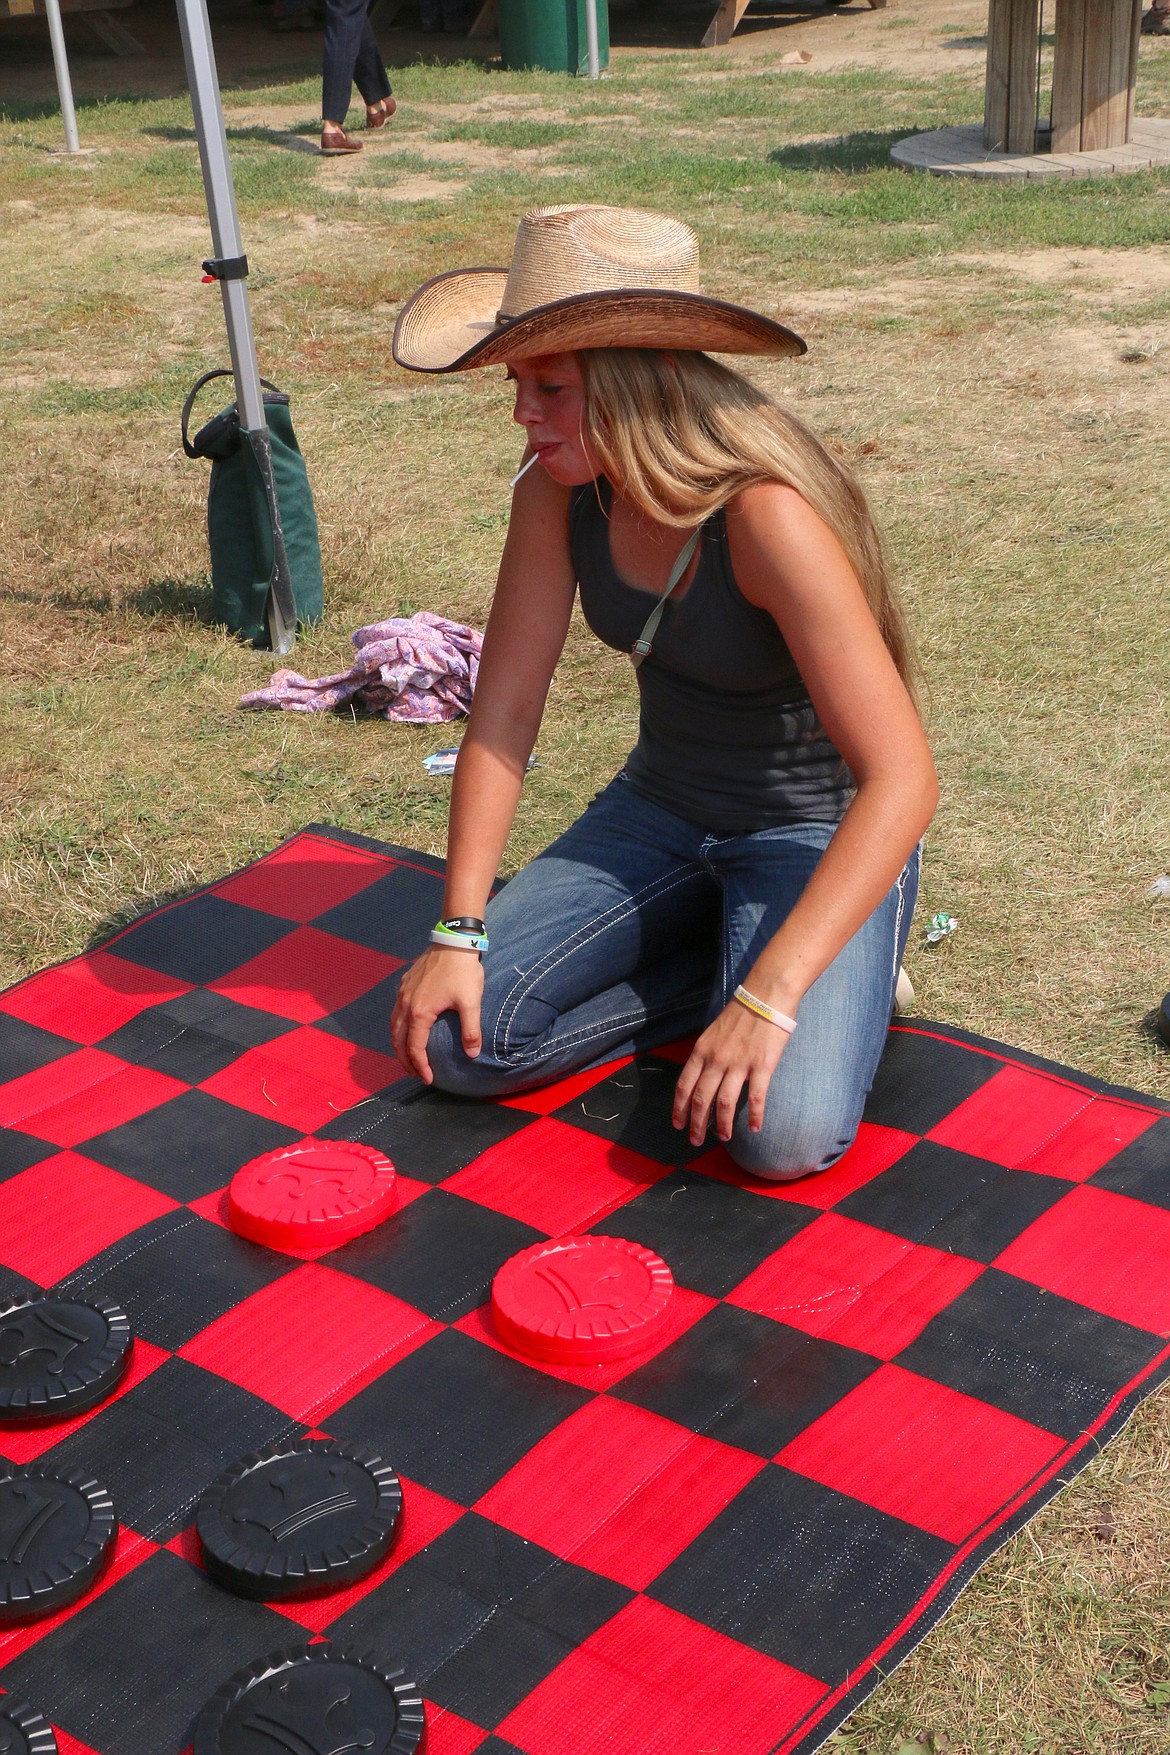 Zoe Hunt ponders her next move as she plays a game of checkers with a friend at the Bonner County Fair on Friday.